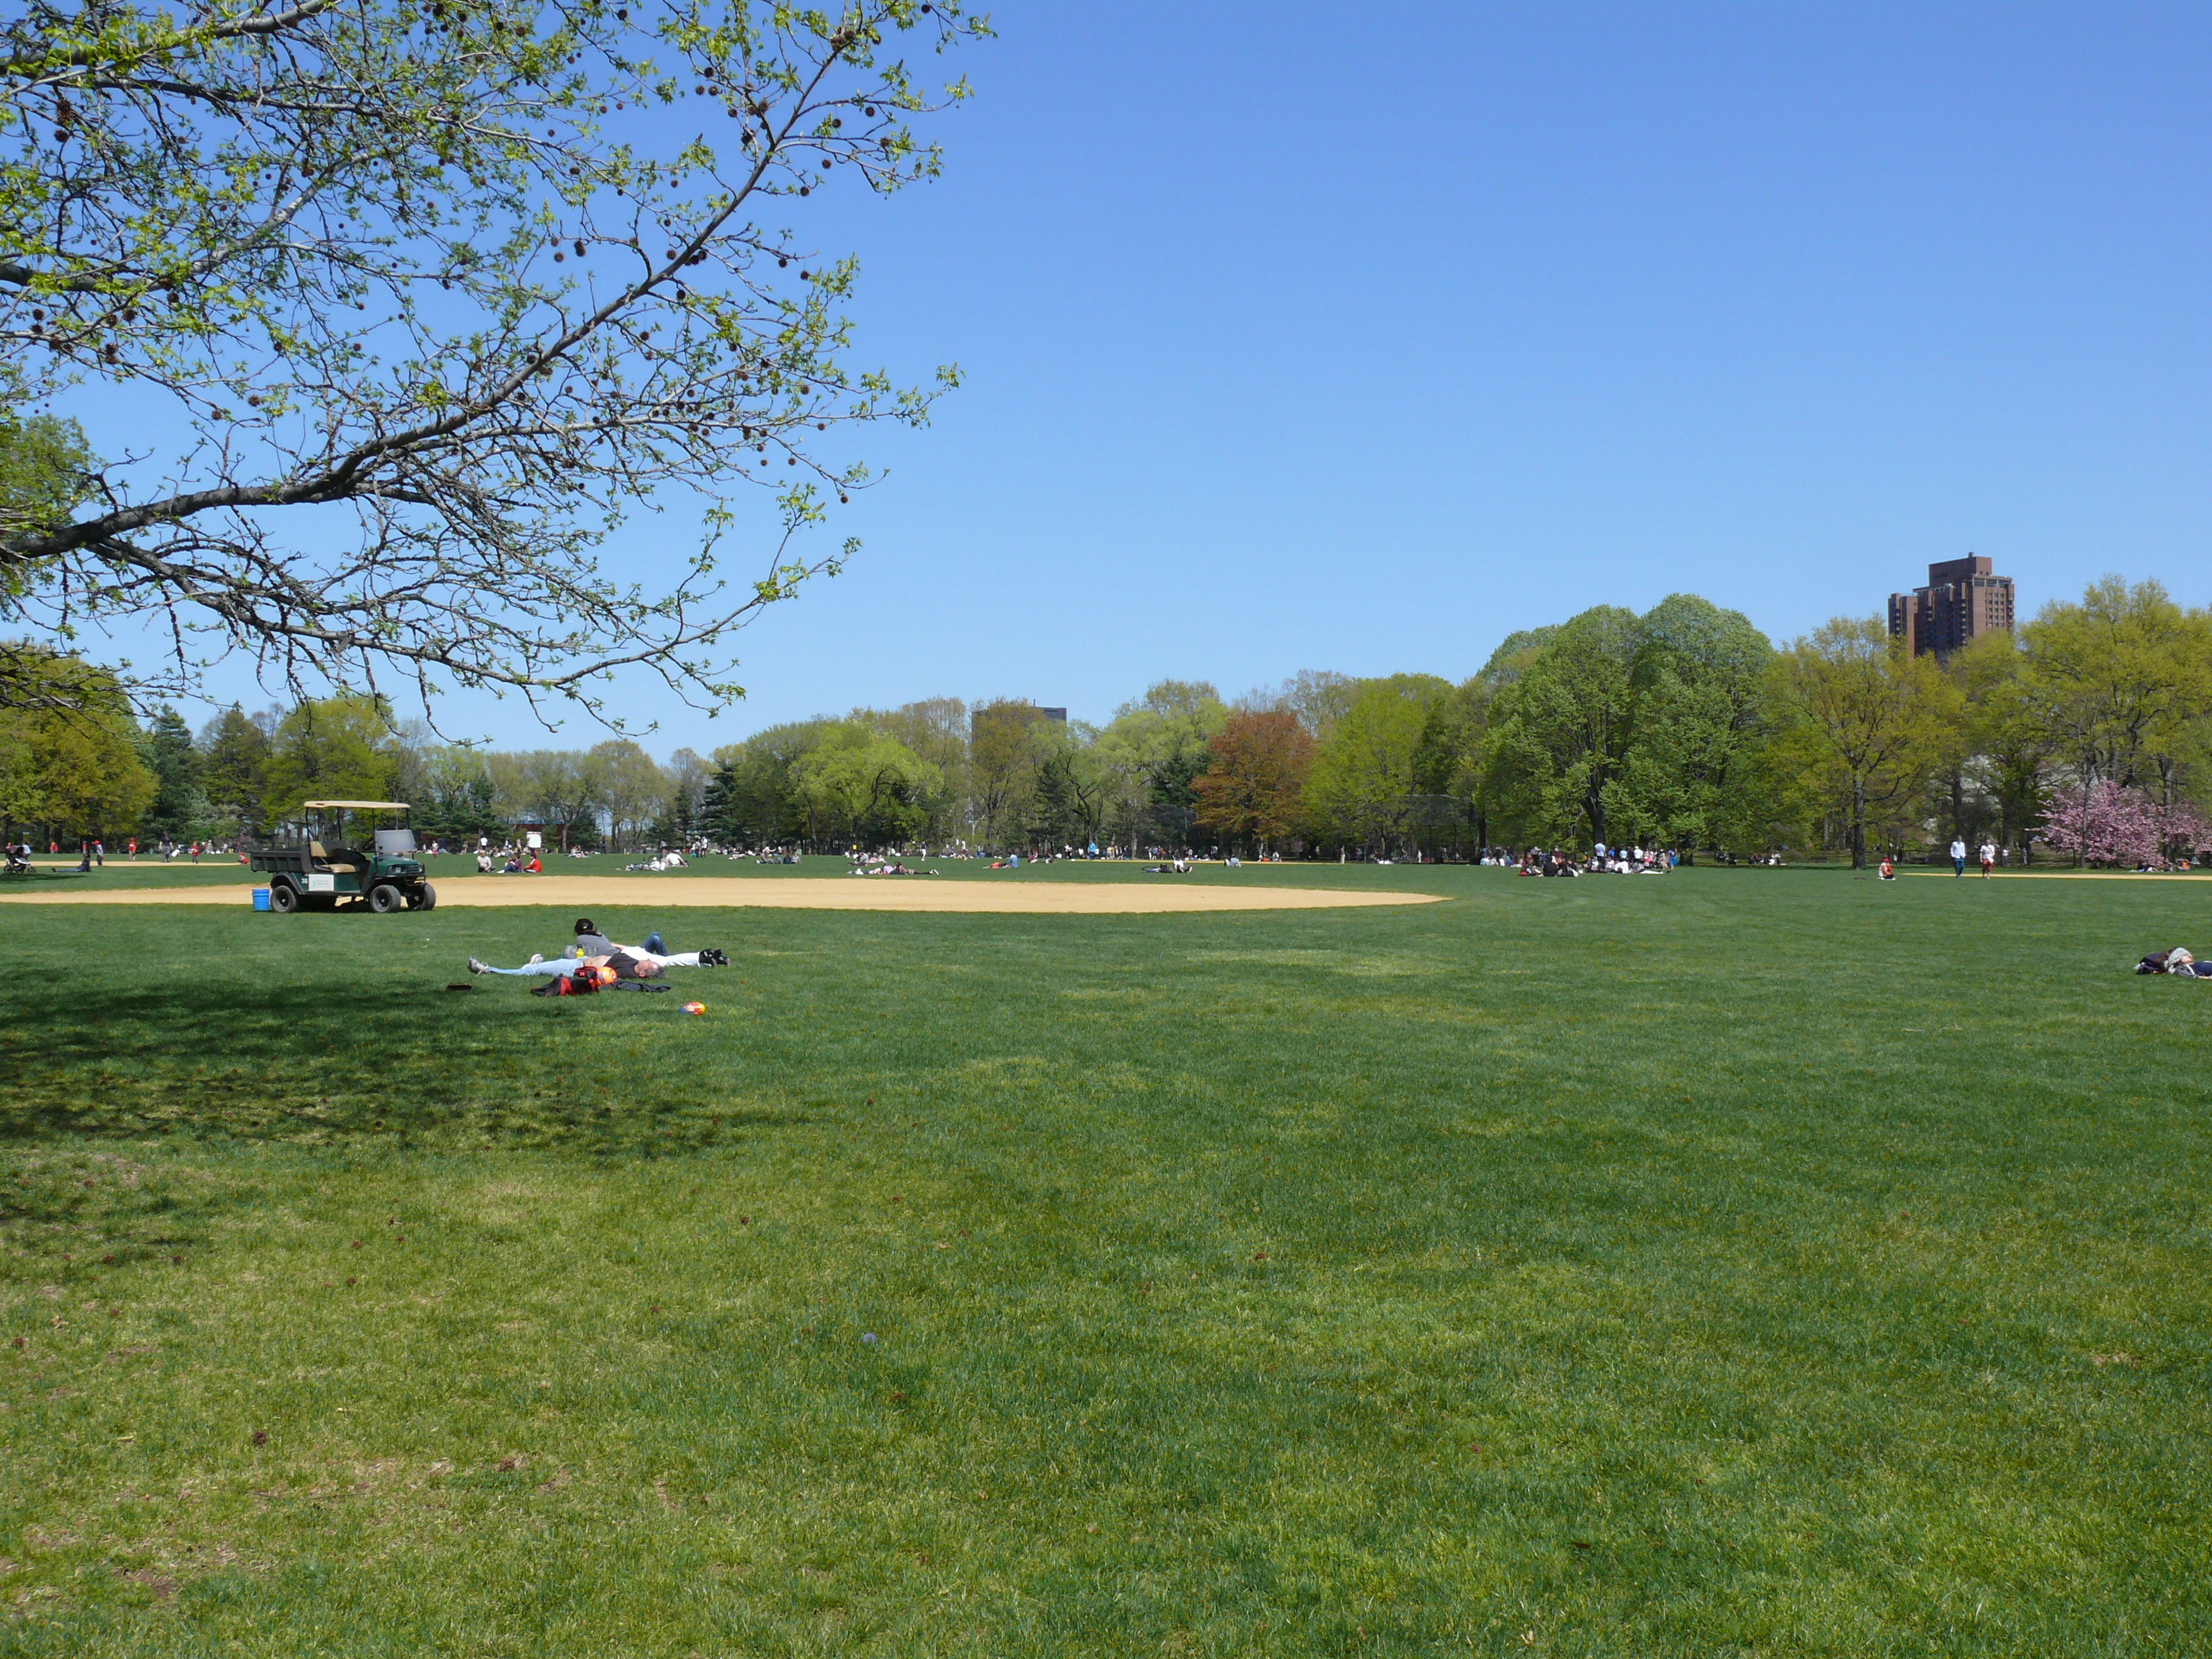 File:Central Park view 01.JPG - Wikimedia Commons